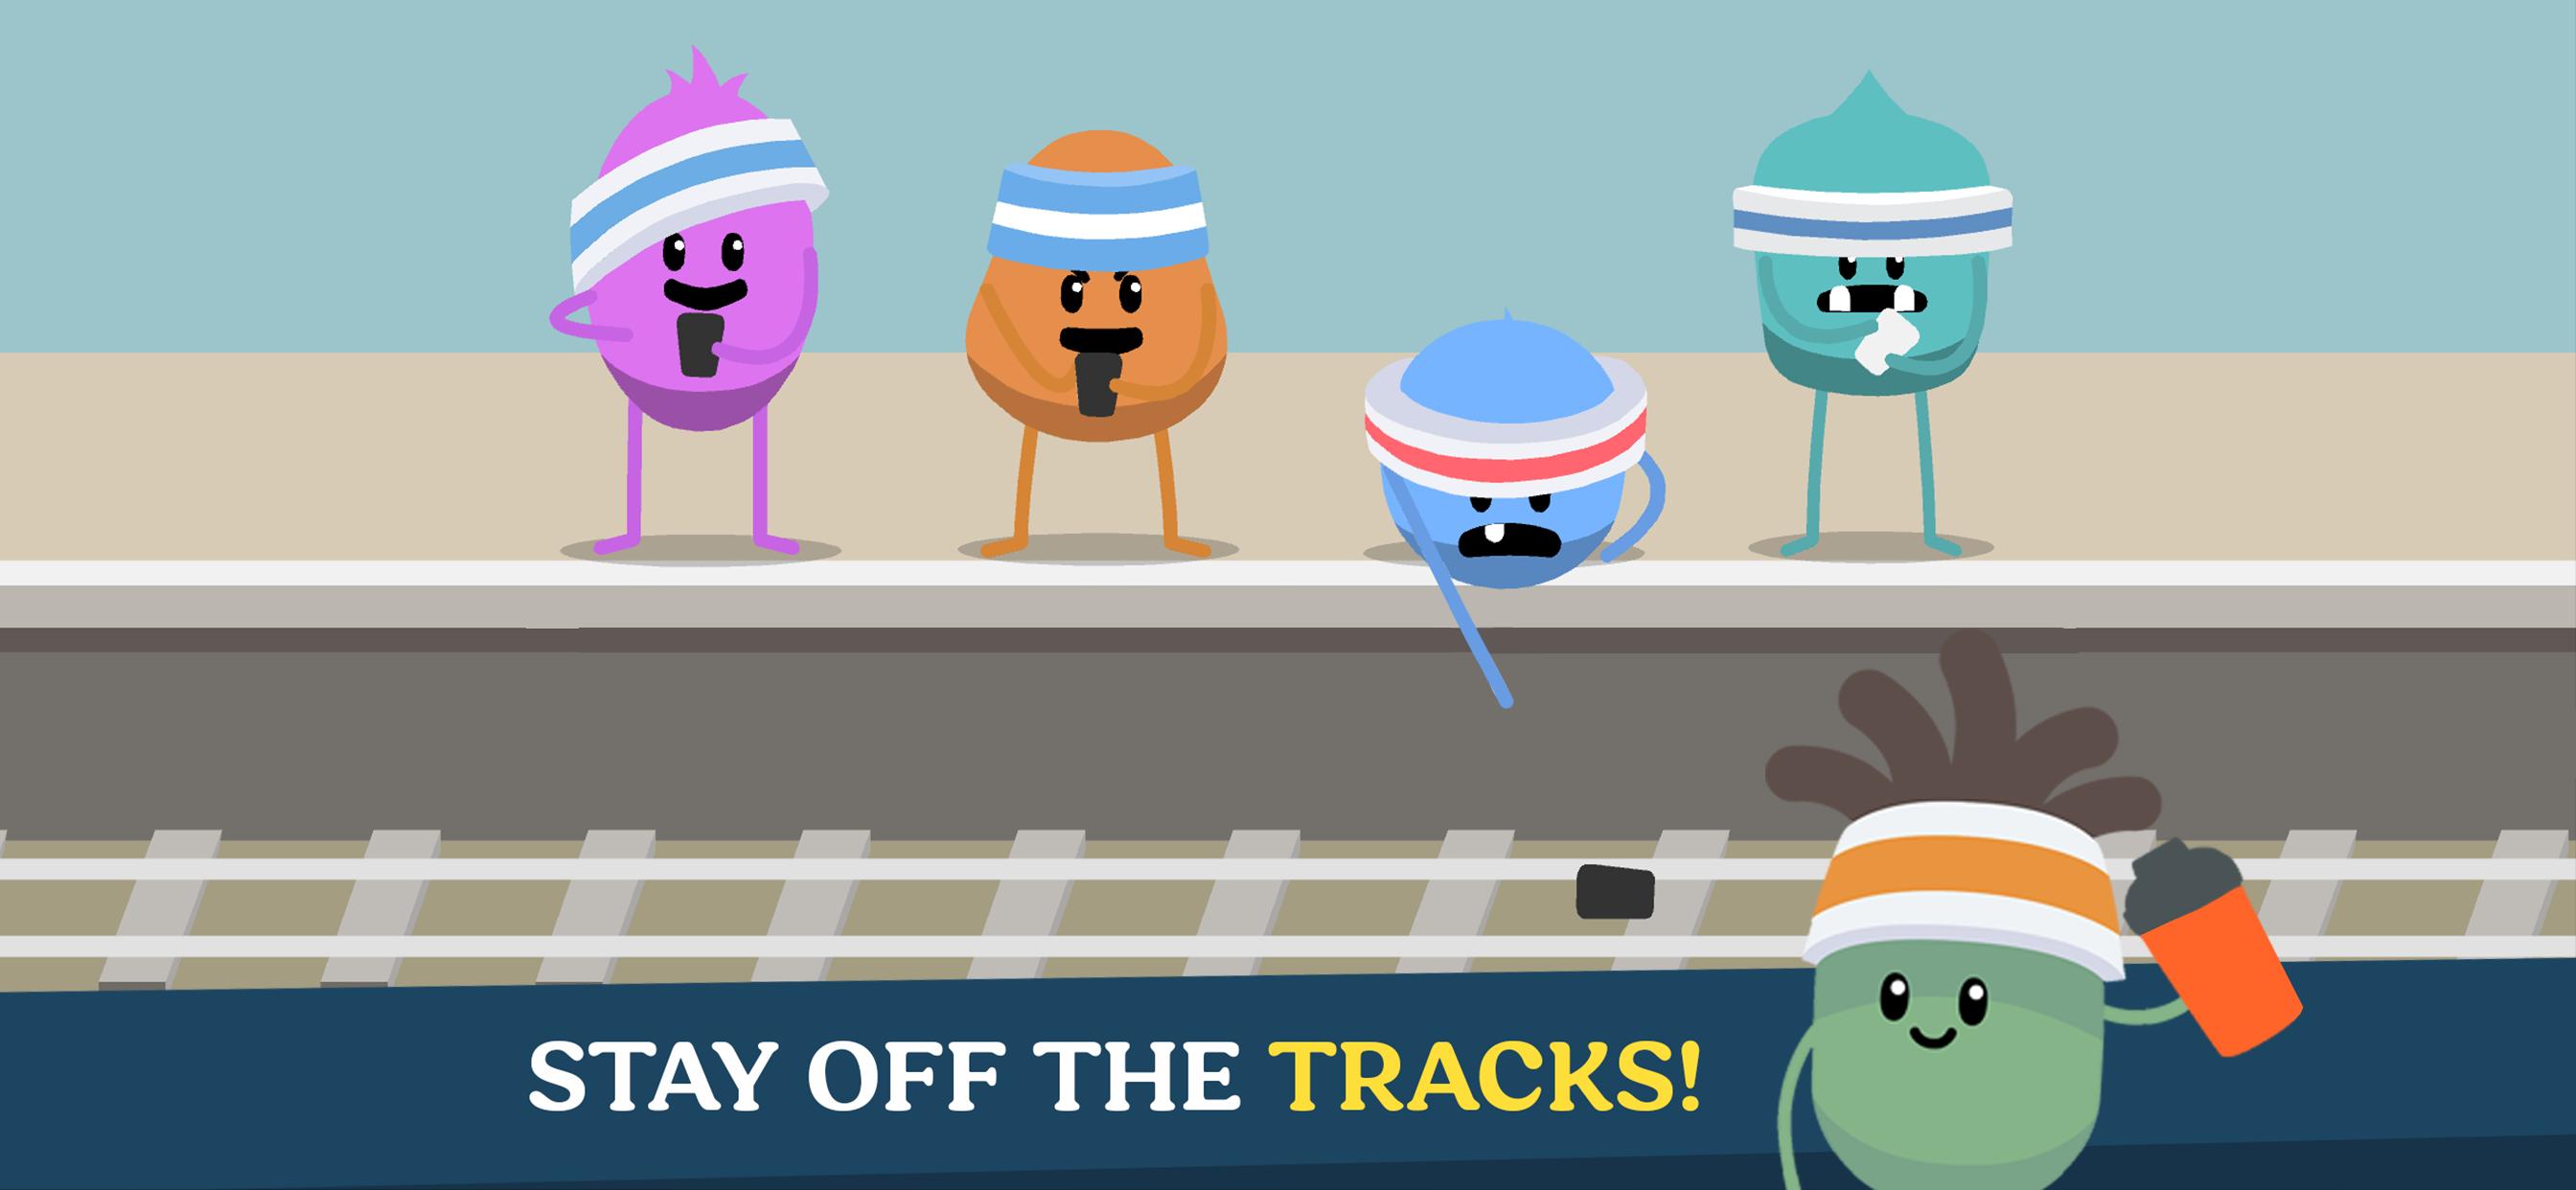 Dumb Ways to Die 2: The Games APK Download for Android - Latest Version